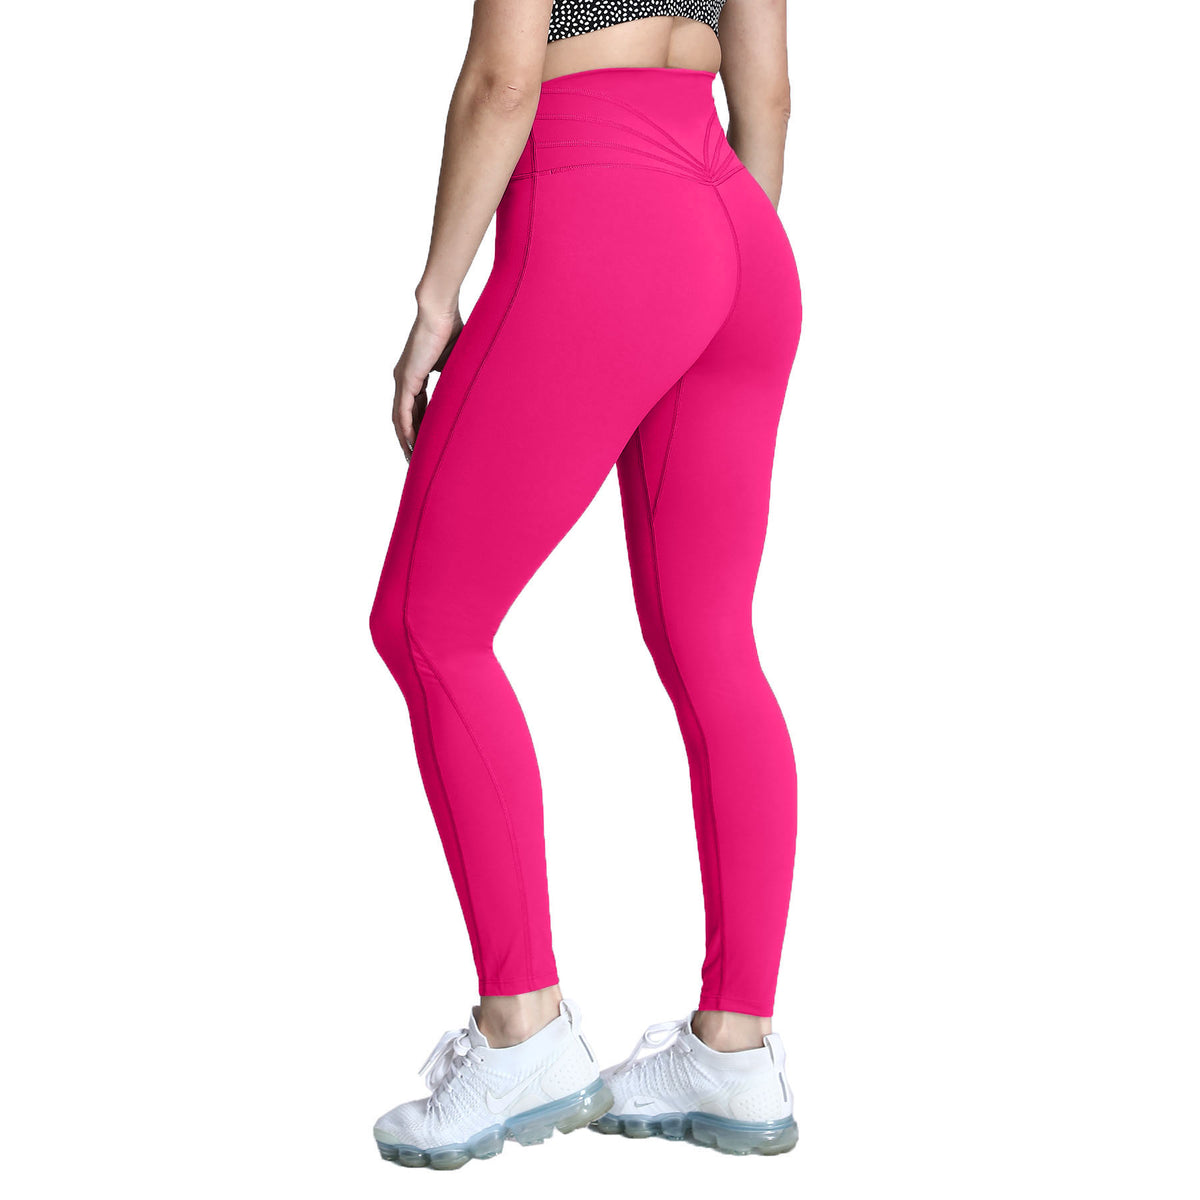 Aoxjox Workout Seamless Leggings for Women High Waisted Exercise Athletic  Gym Fitness Yoga Lexi Lined Leggings (Baton Red/Mauve, Small) at   Women's Clothing store